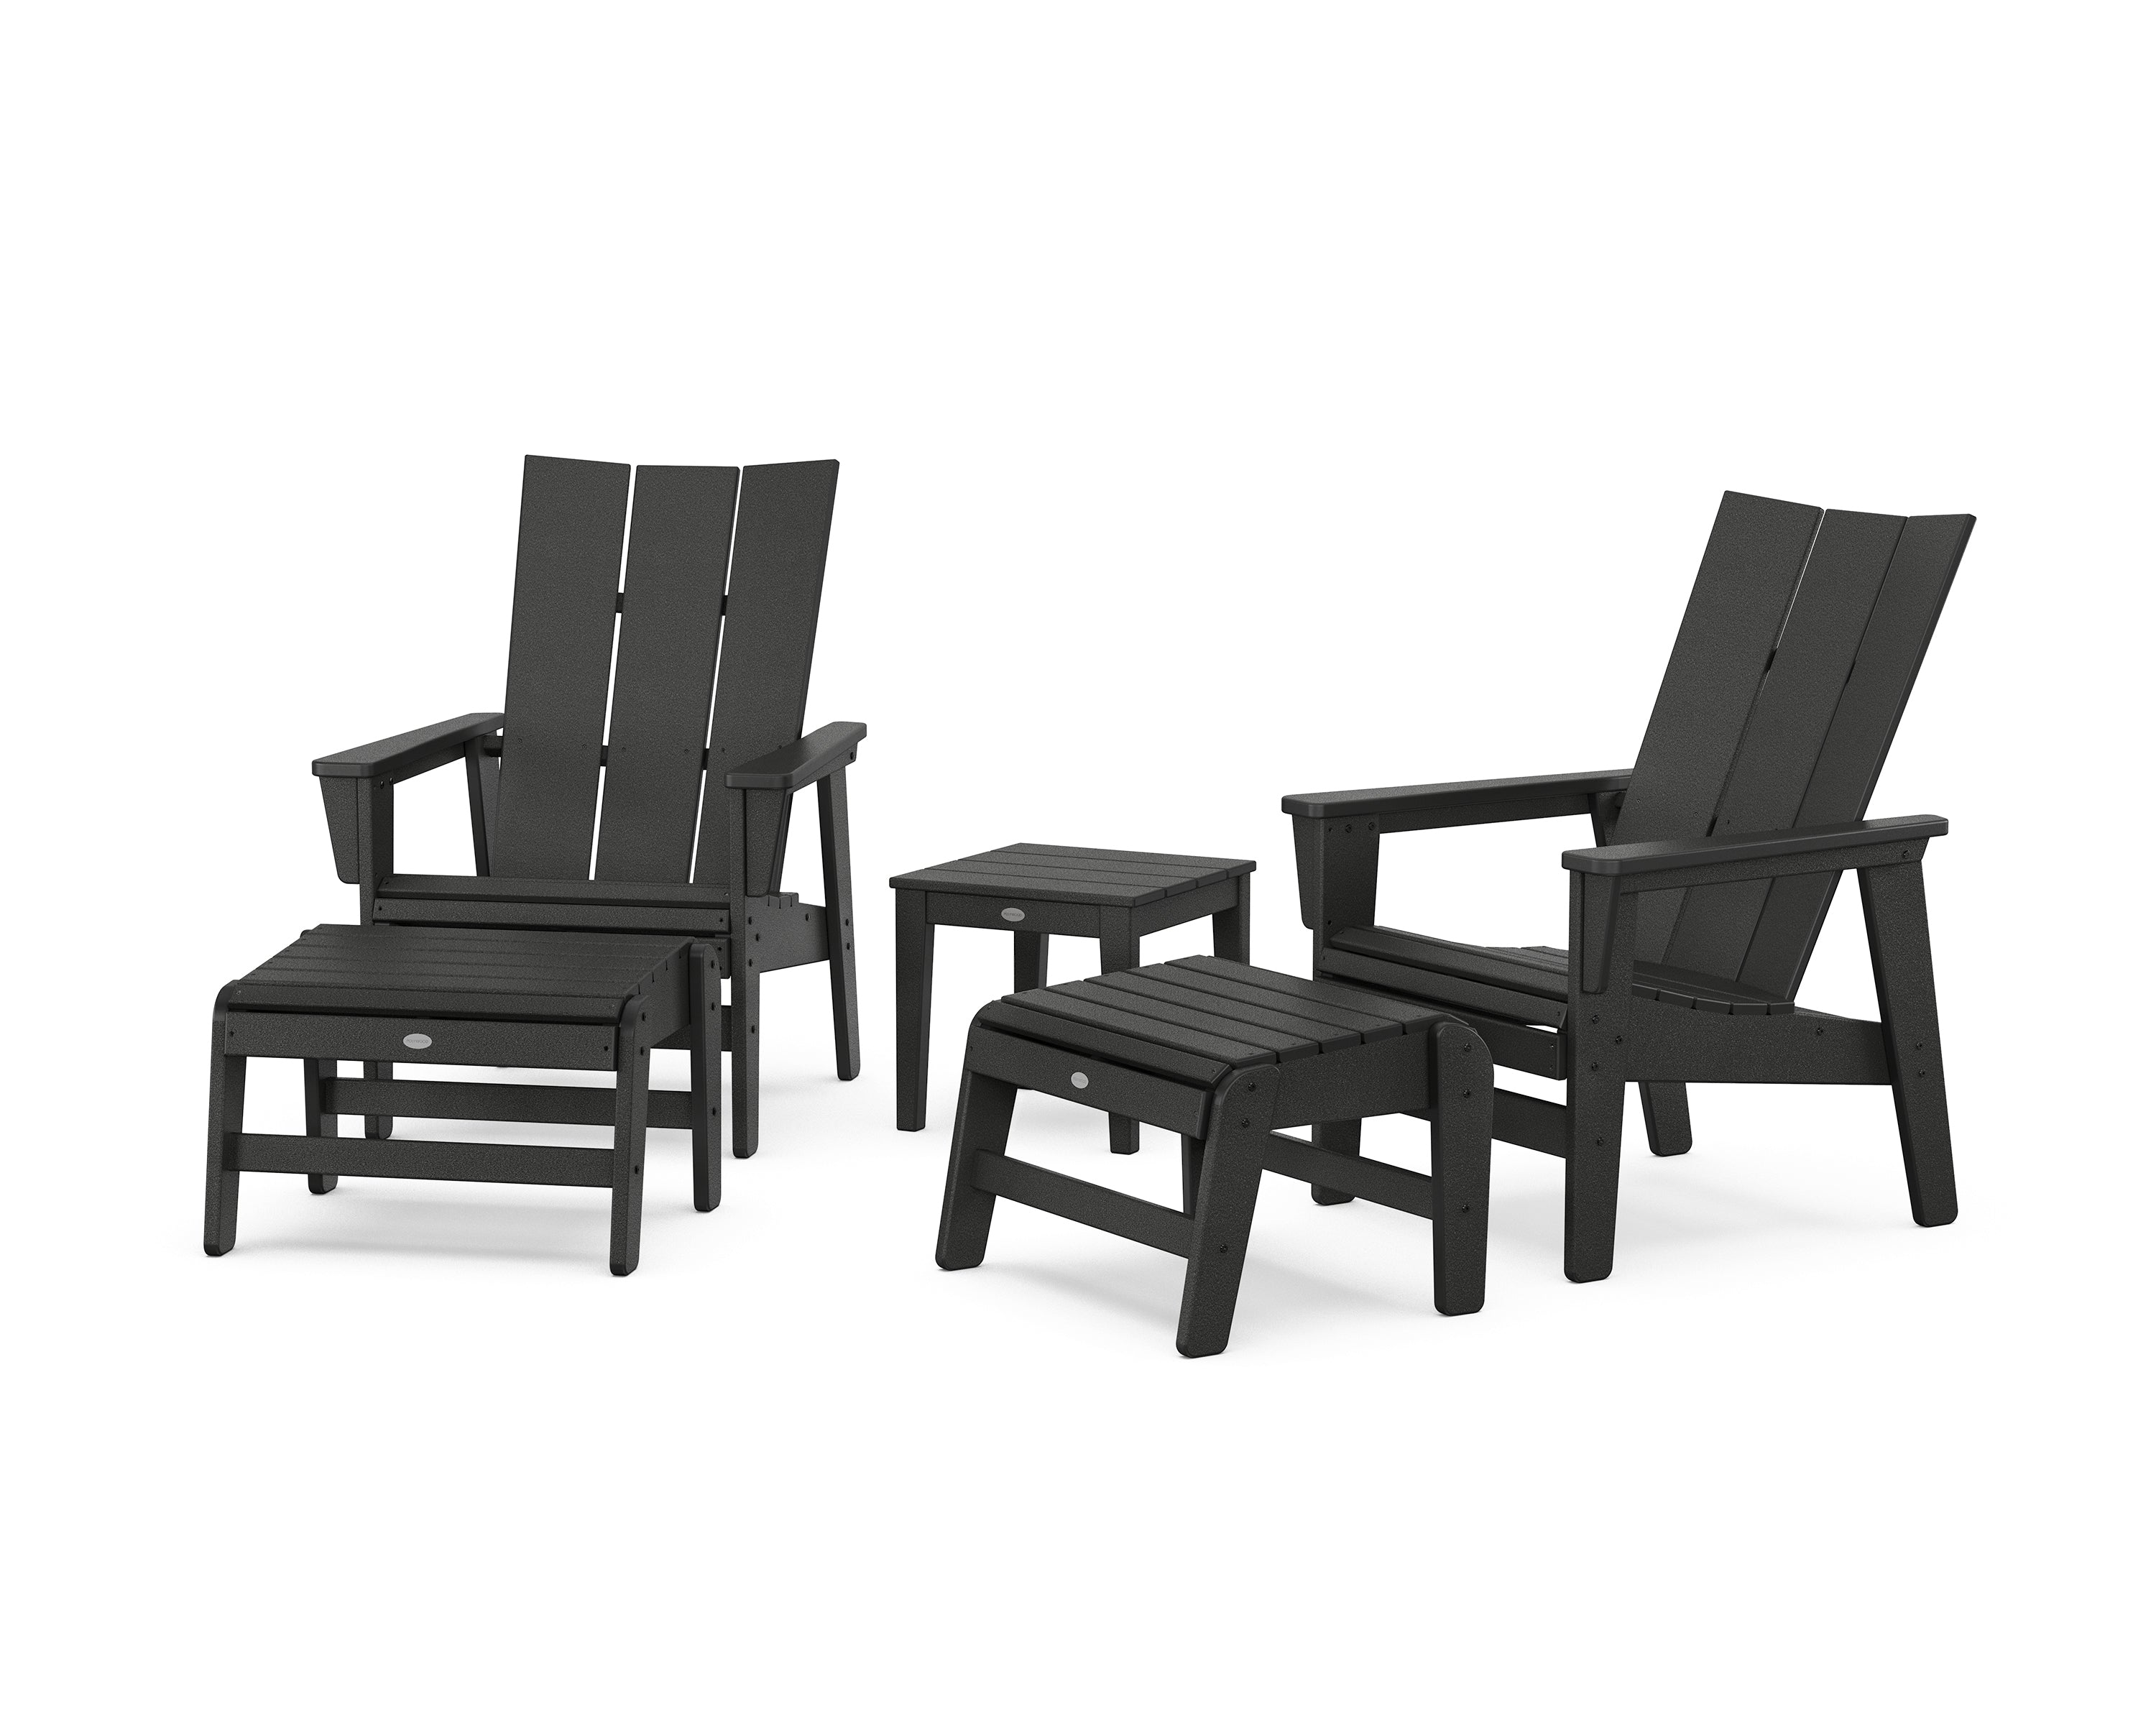 POLYWOOD® 5-Piece Modern Grand Upright Adirondack Set with Ottomans and Side Table in Black